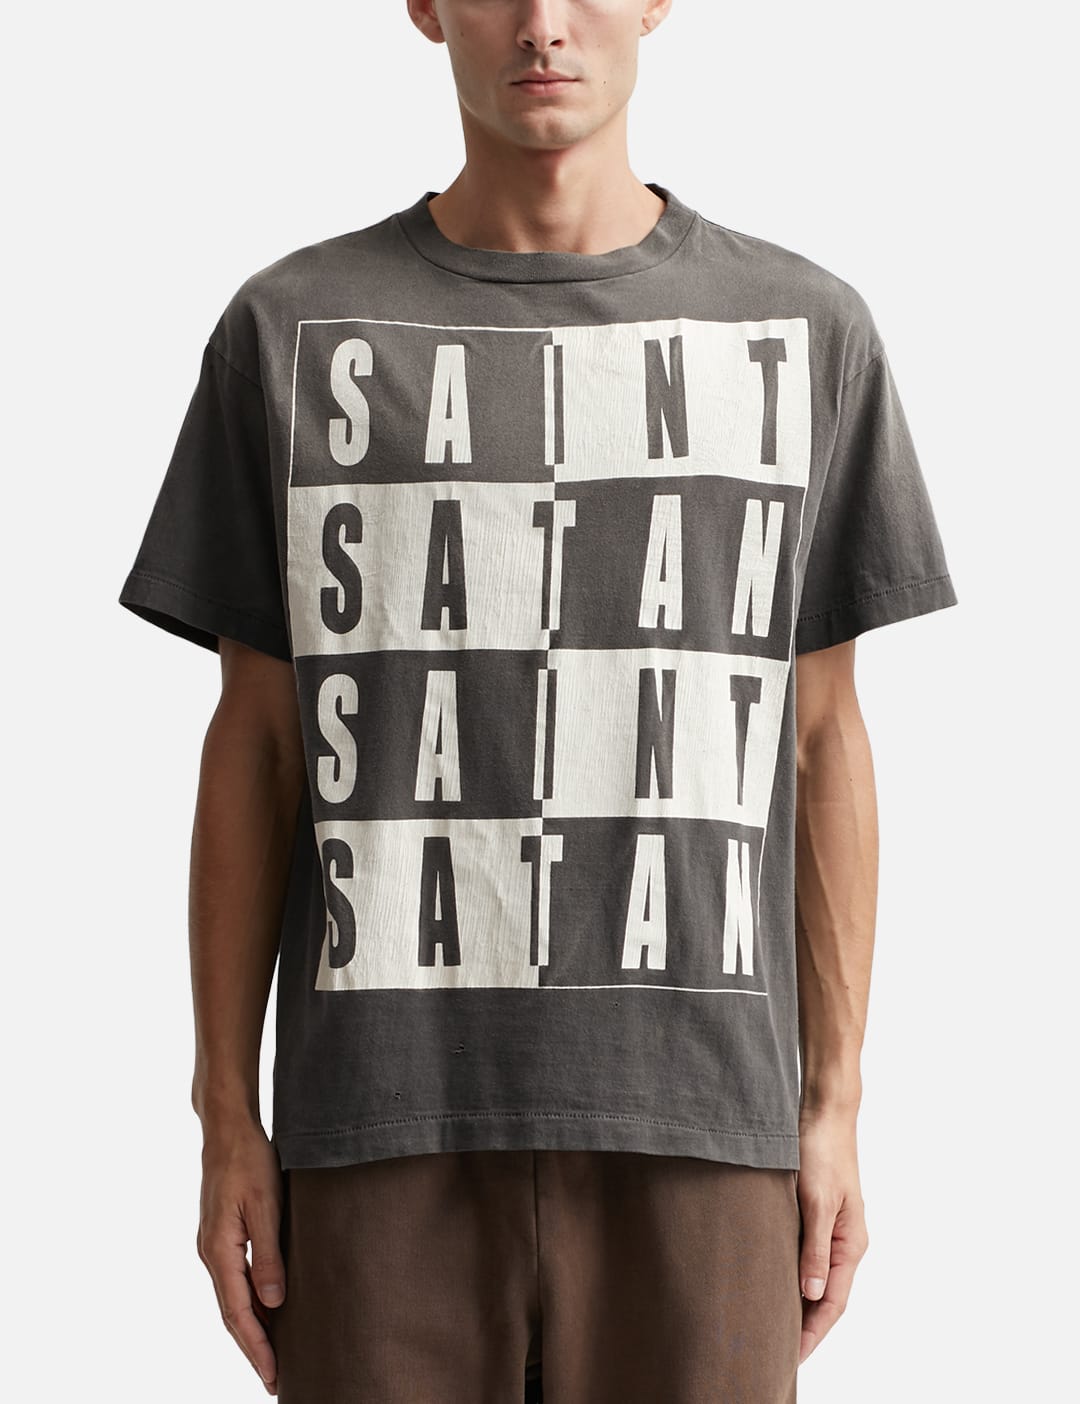 Saint Michael - MIGHTY DEVIL T-shirt | HBX - Globally Curated